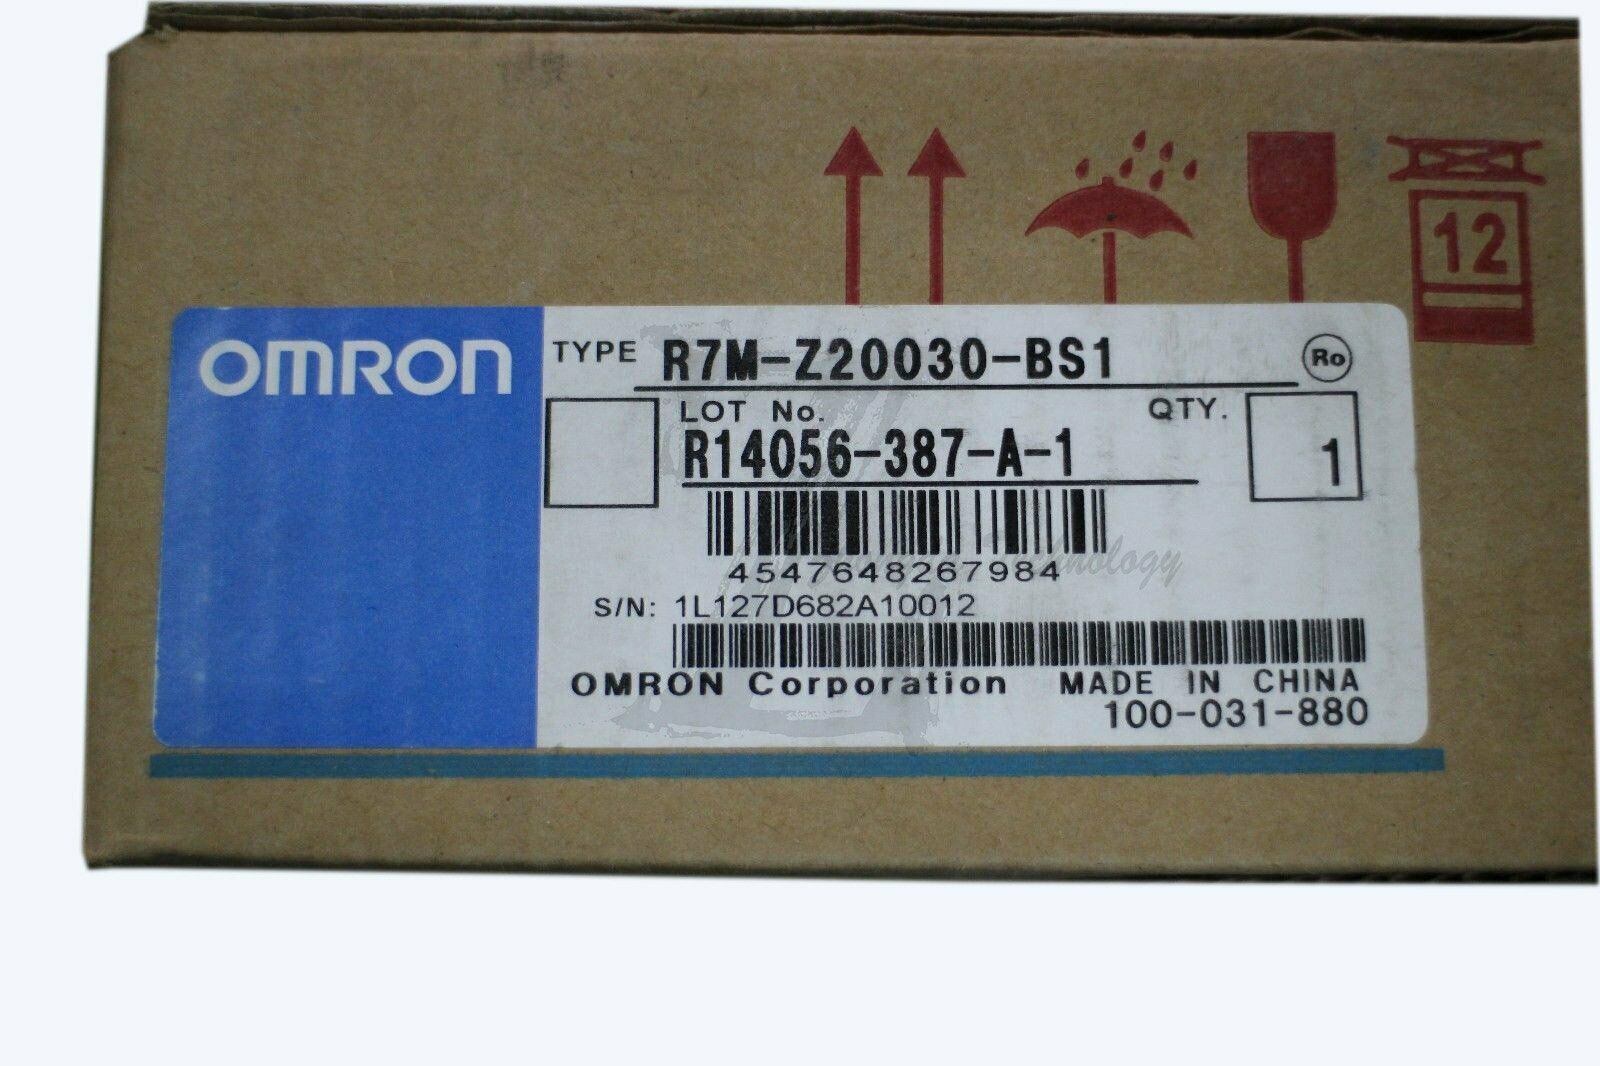 1pc new Omron R7M-Z20030-BS1 module one year warranty KOEED 500+, 90%, import_2020_10_10_031751, Omron, Other